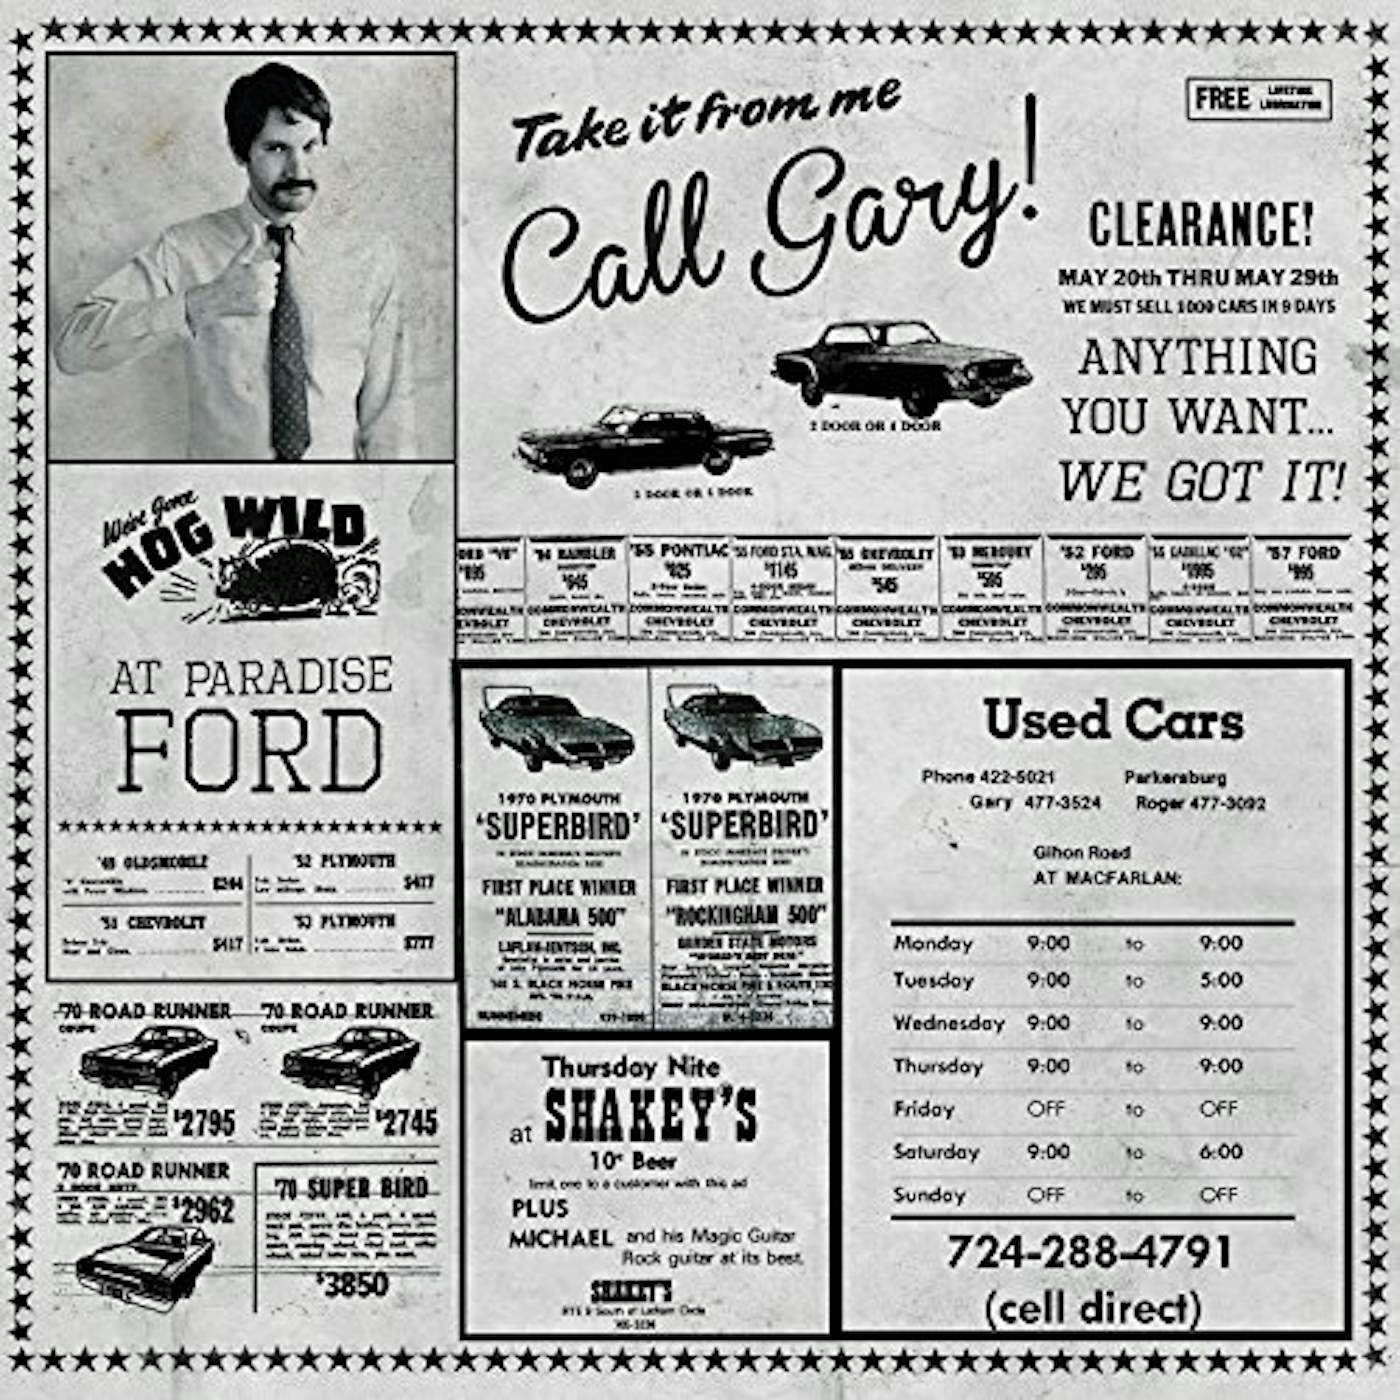 GARY USED CARS / WISH YOU WERE HAIR Vinyl Record